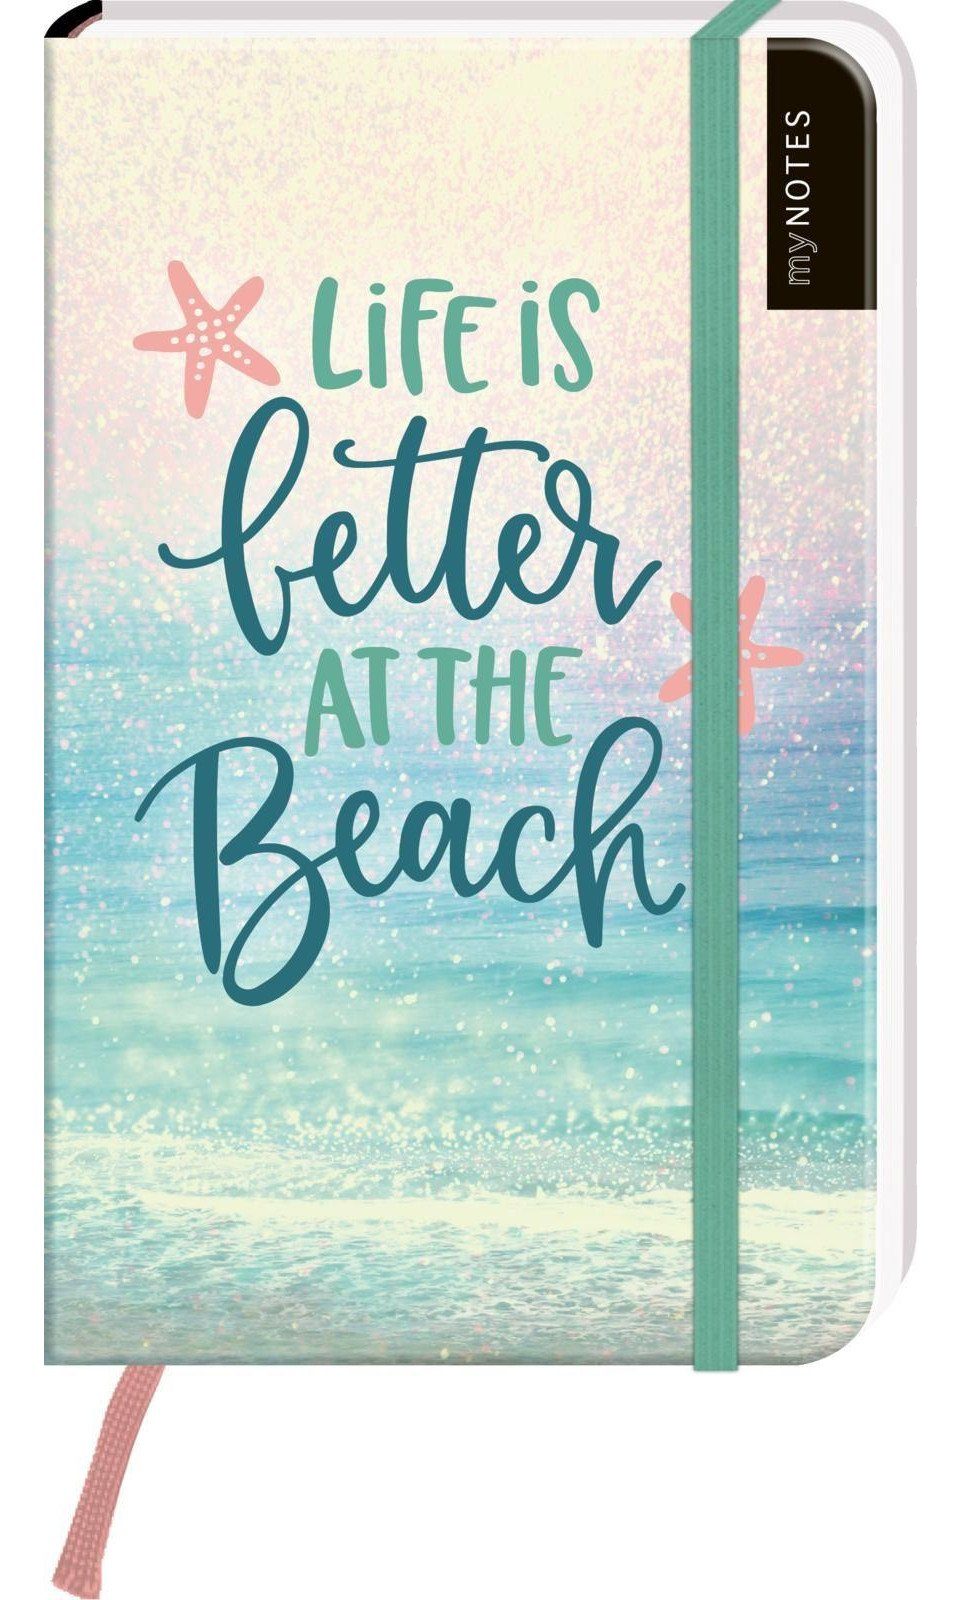 A6: is Life Edition Notizbuch the beach at myNOTES Notizbuch better Ars